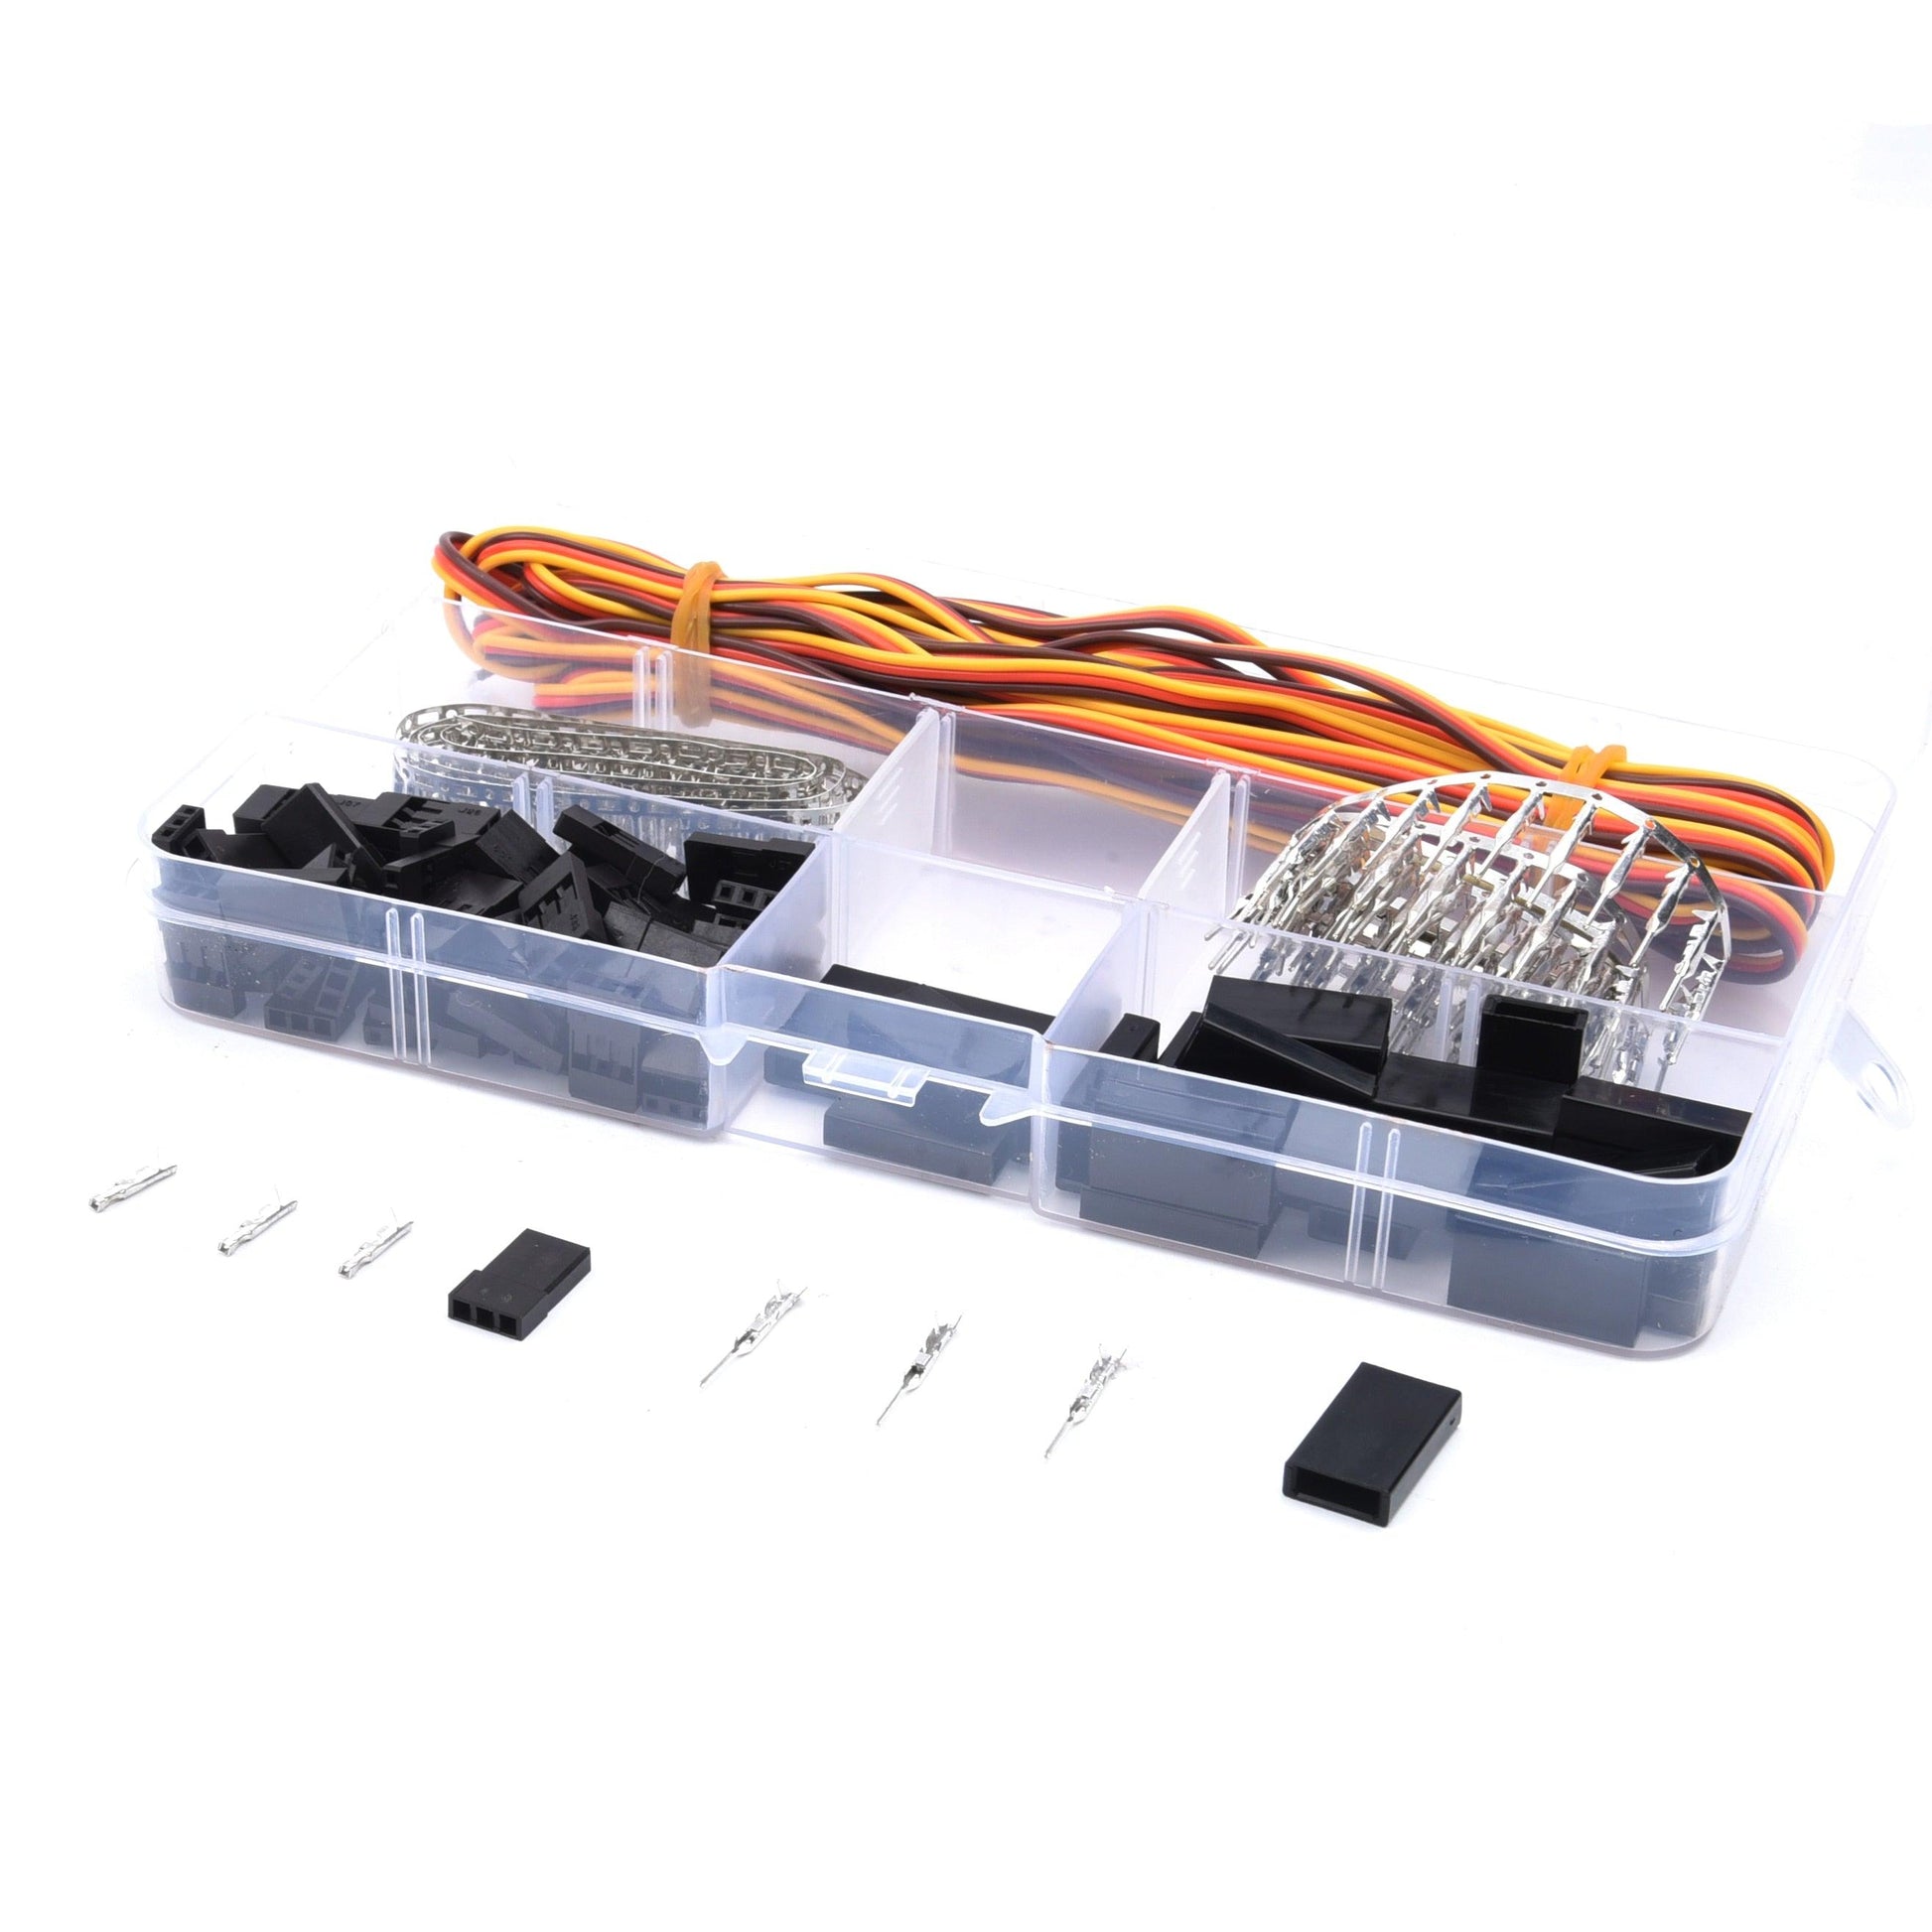 30 Sets/Box Servo Connector Cable Wire Connector Male Female Kit with 26Awg Servo Cord for JR Style - RCDrone